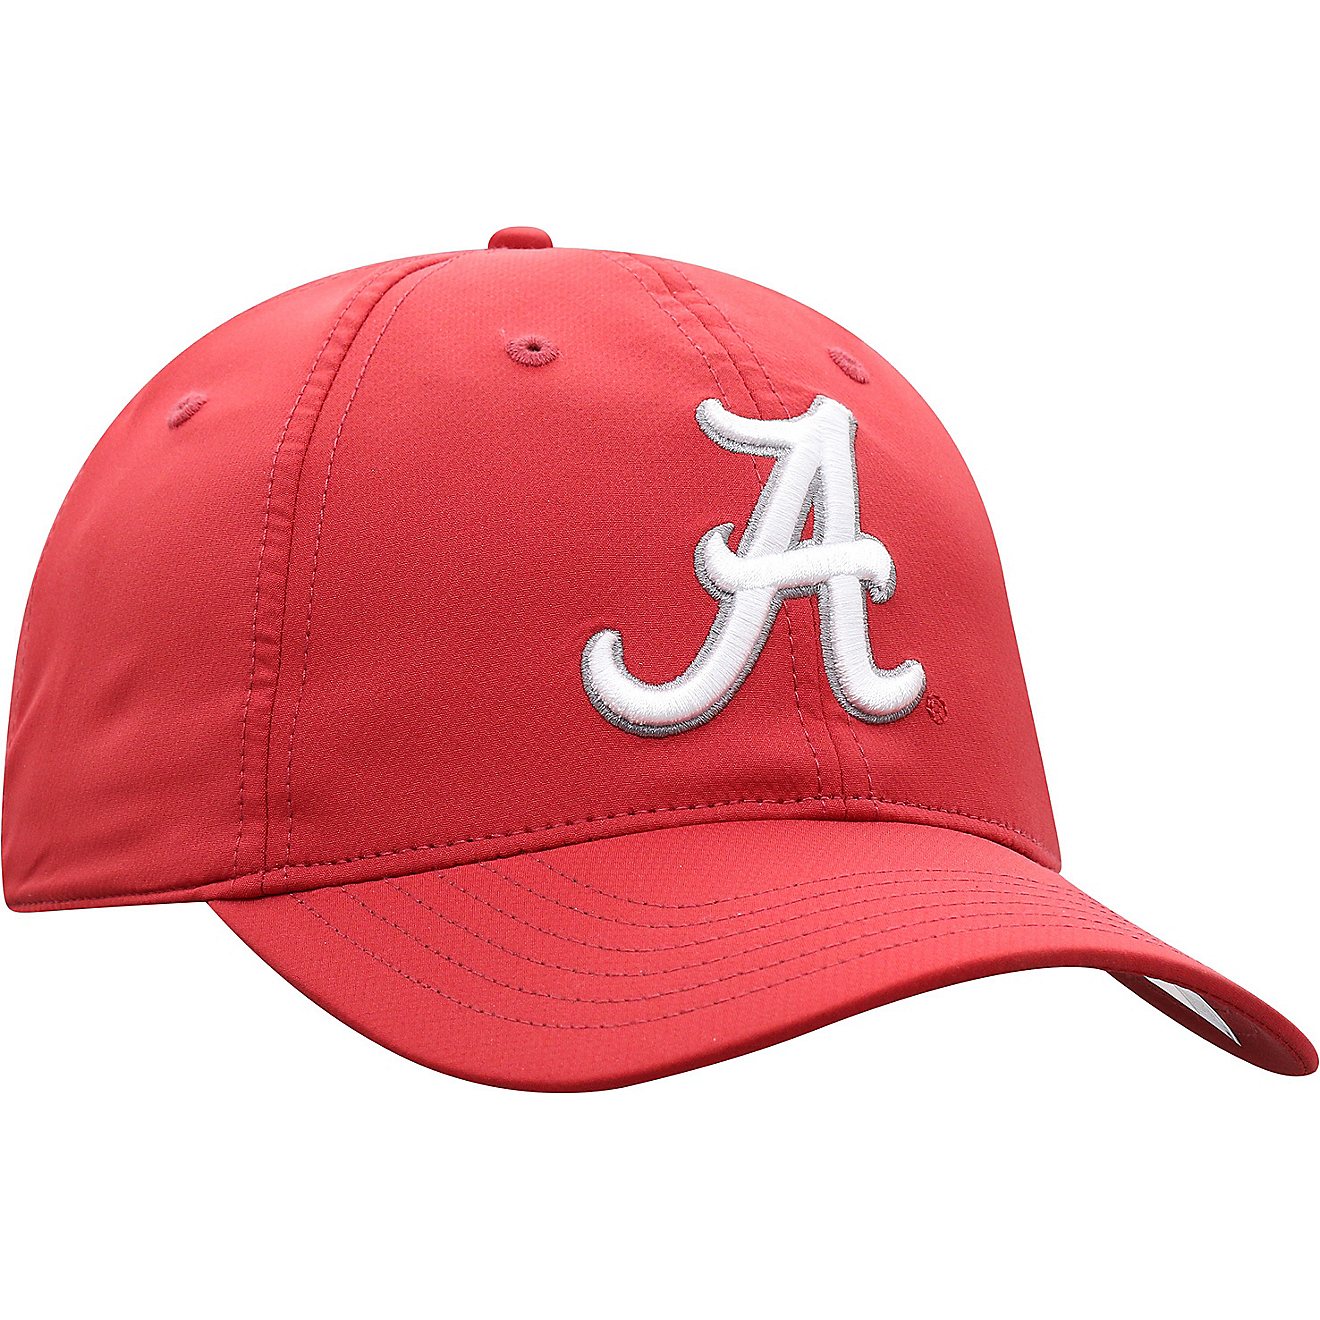 Top of the World Adults' University of Alabama Trainer 2020 Adjustable Cap                                                       - view number 4